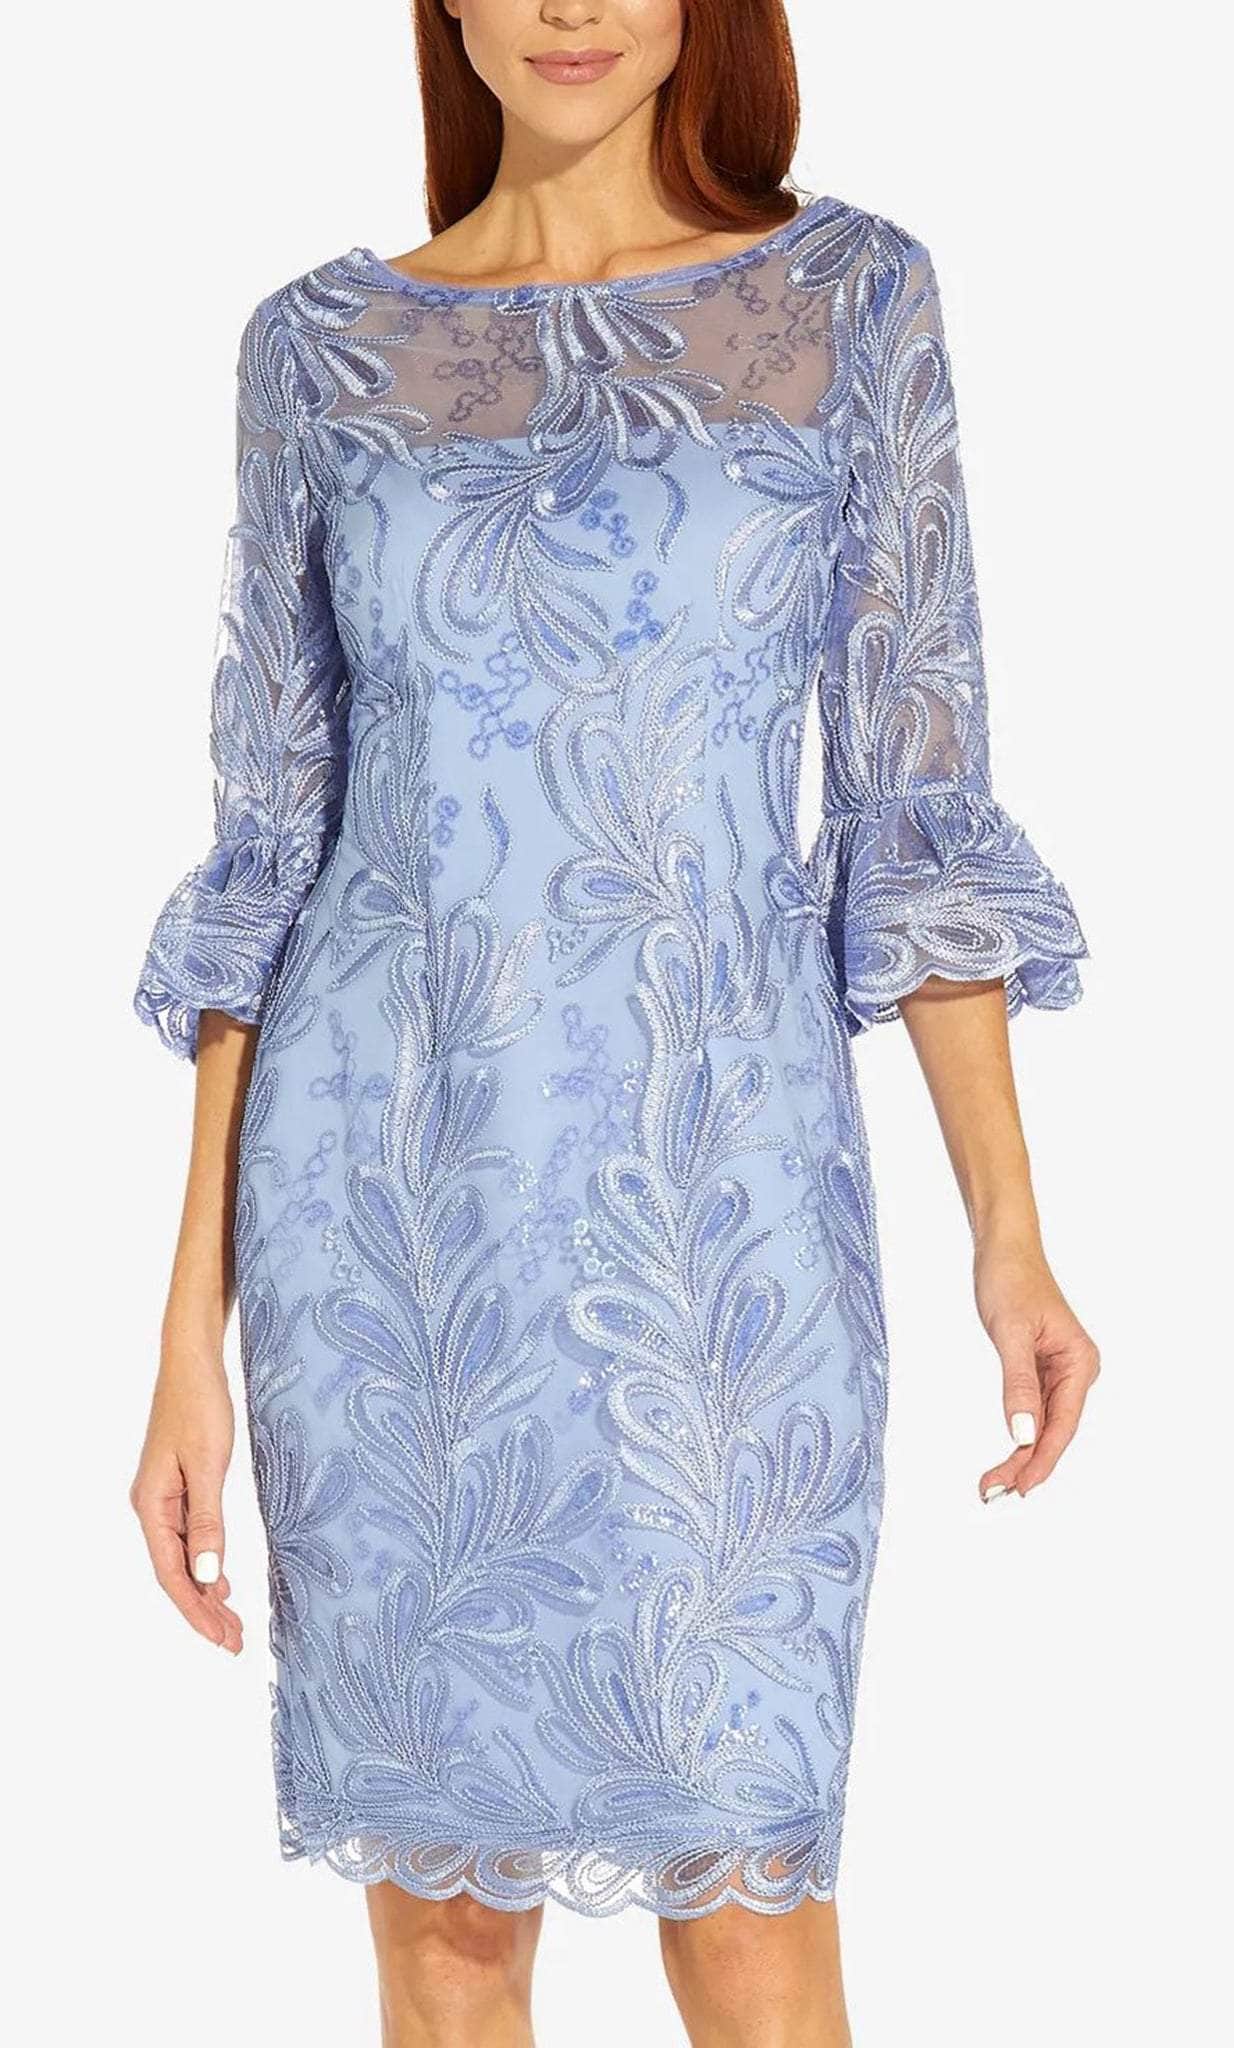 Adrianna Papell AP1D104722 - Embroidered Bell Sleeve Cocktail Dress Cocktail Dresses